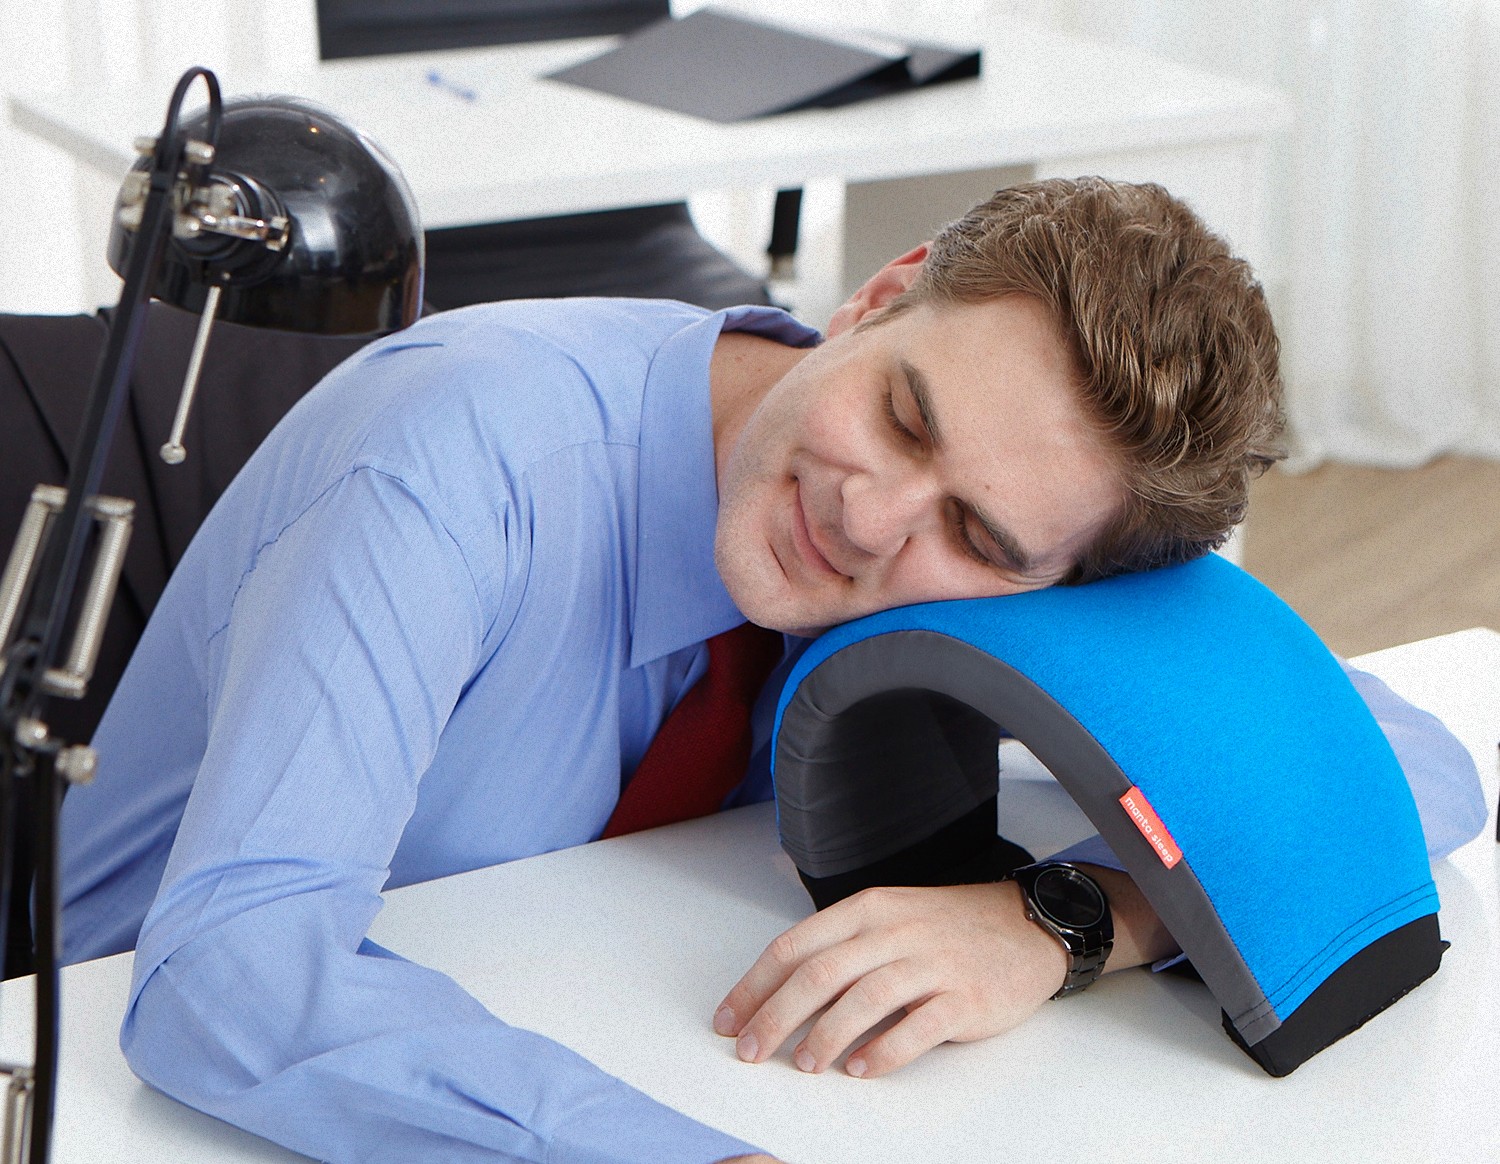 A man sleeping on his desk, using a nap pillow to reap the benefits of napping.